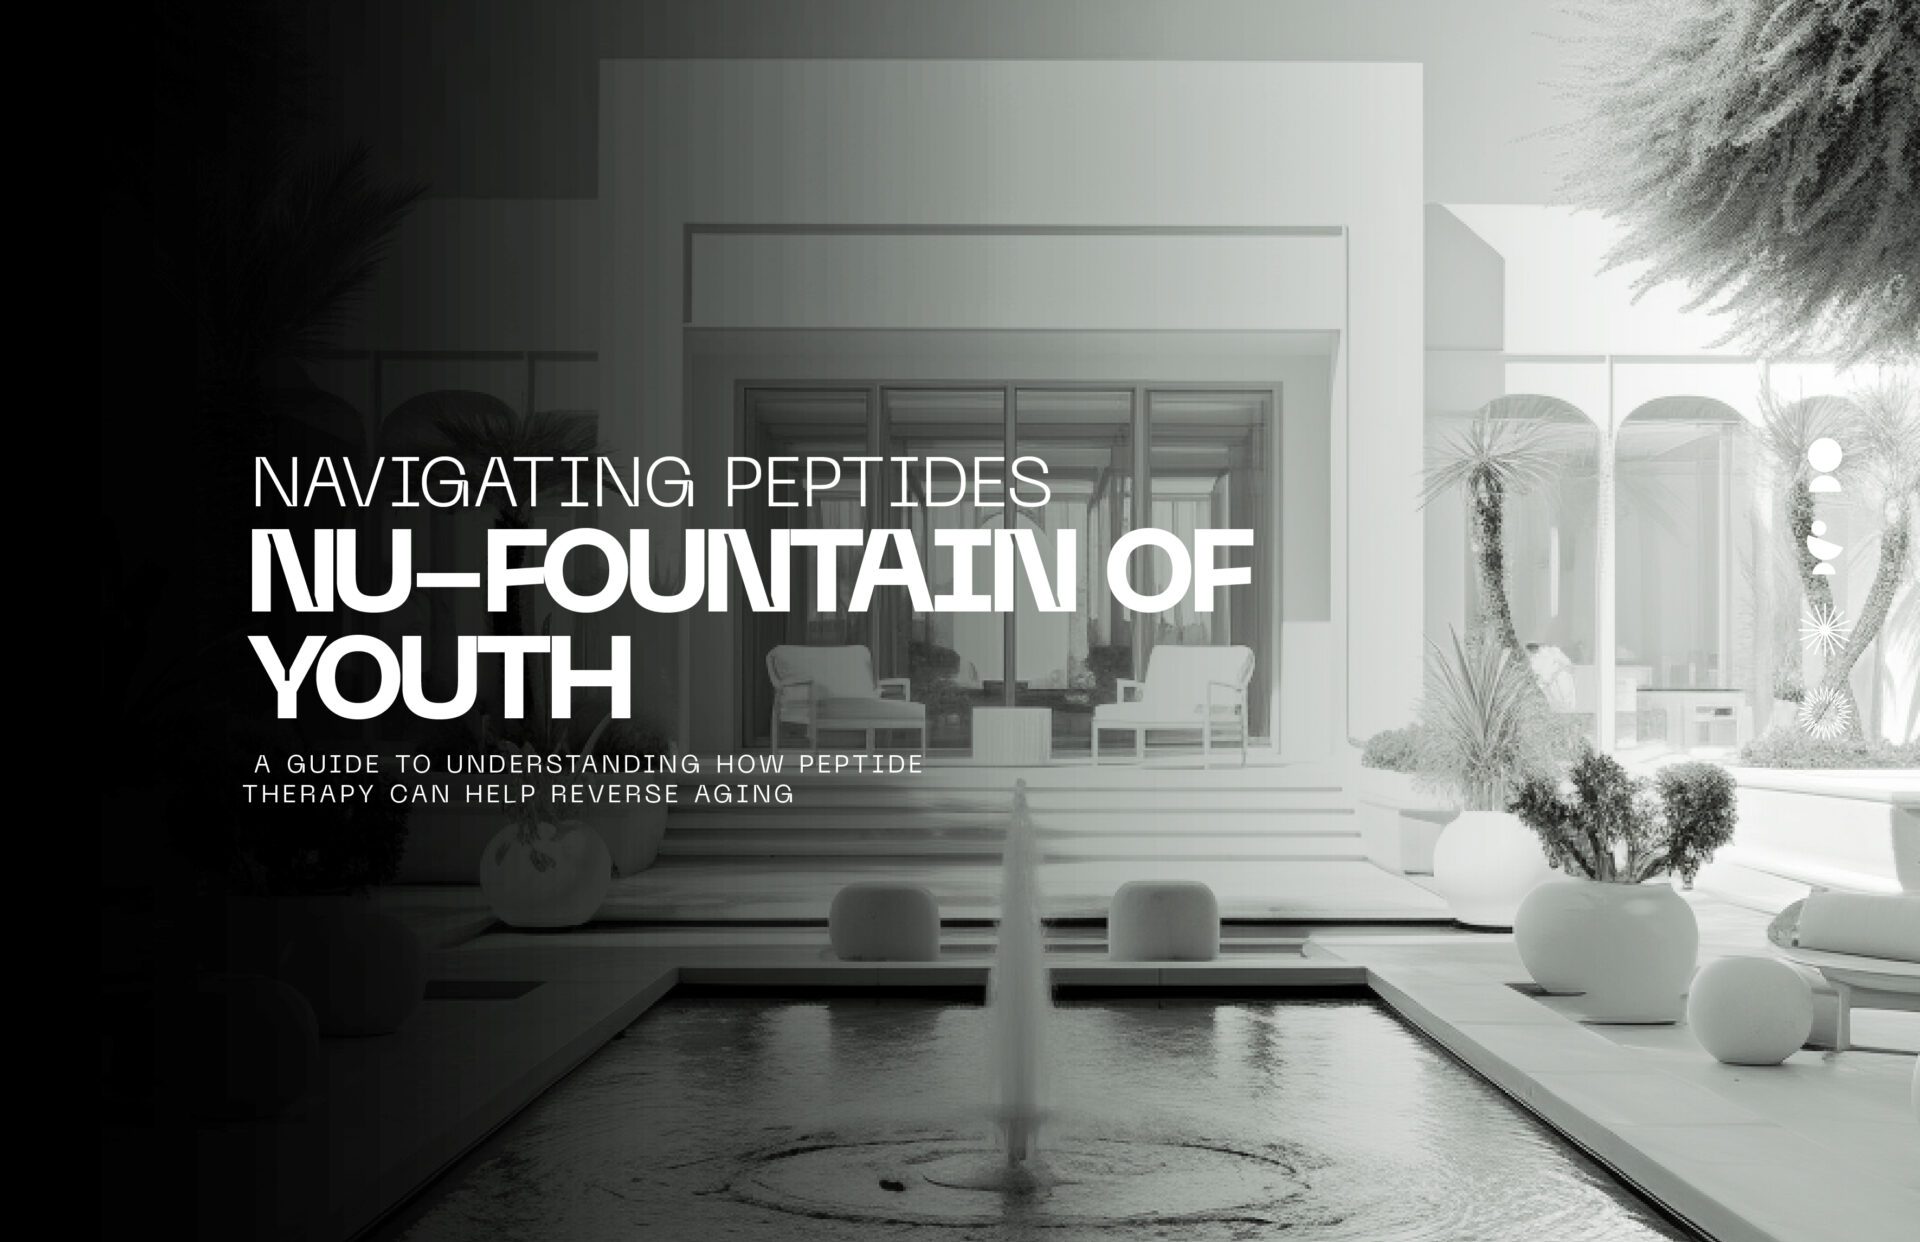 Nu-fountain of youth. A guide to understanding how peptide therapy can help reverse aging